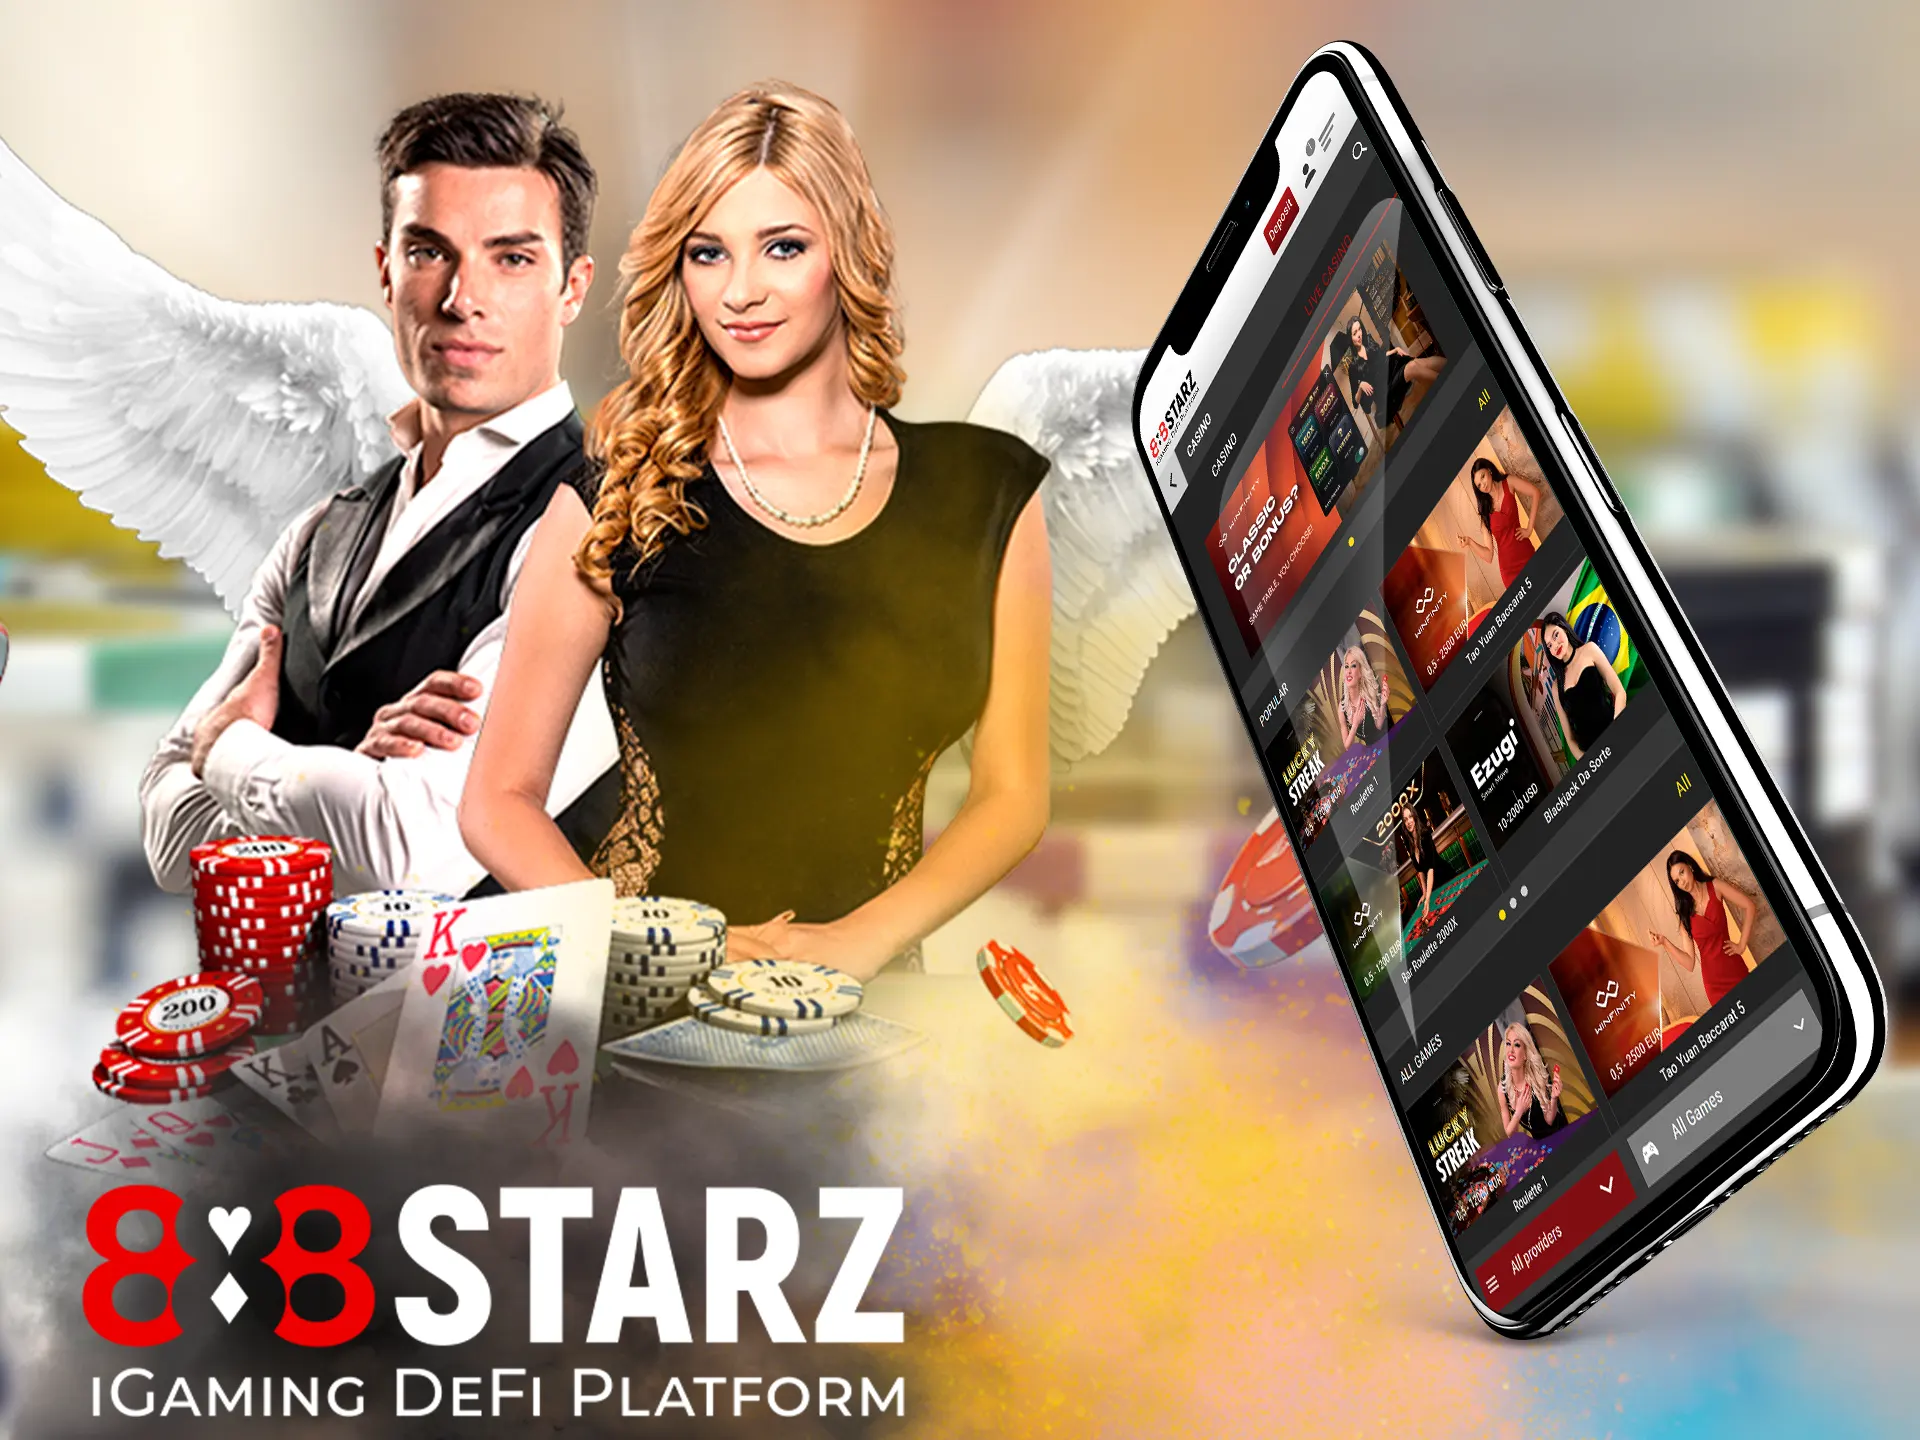 Try your hand at this exciting form of gaming at 888starz Casino, here you will be playing with a real person in real time.